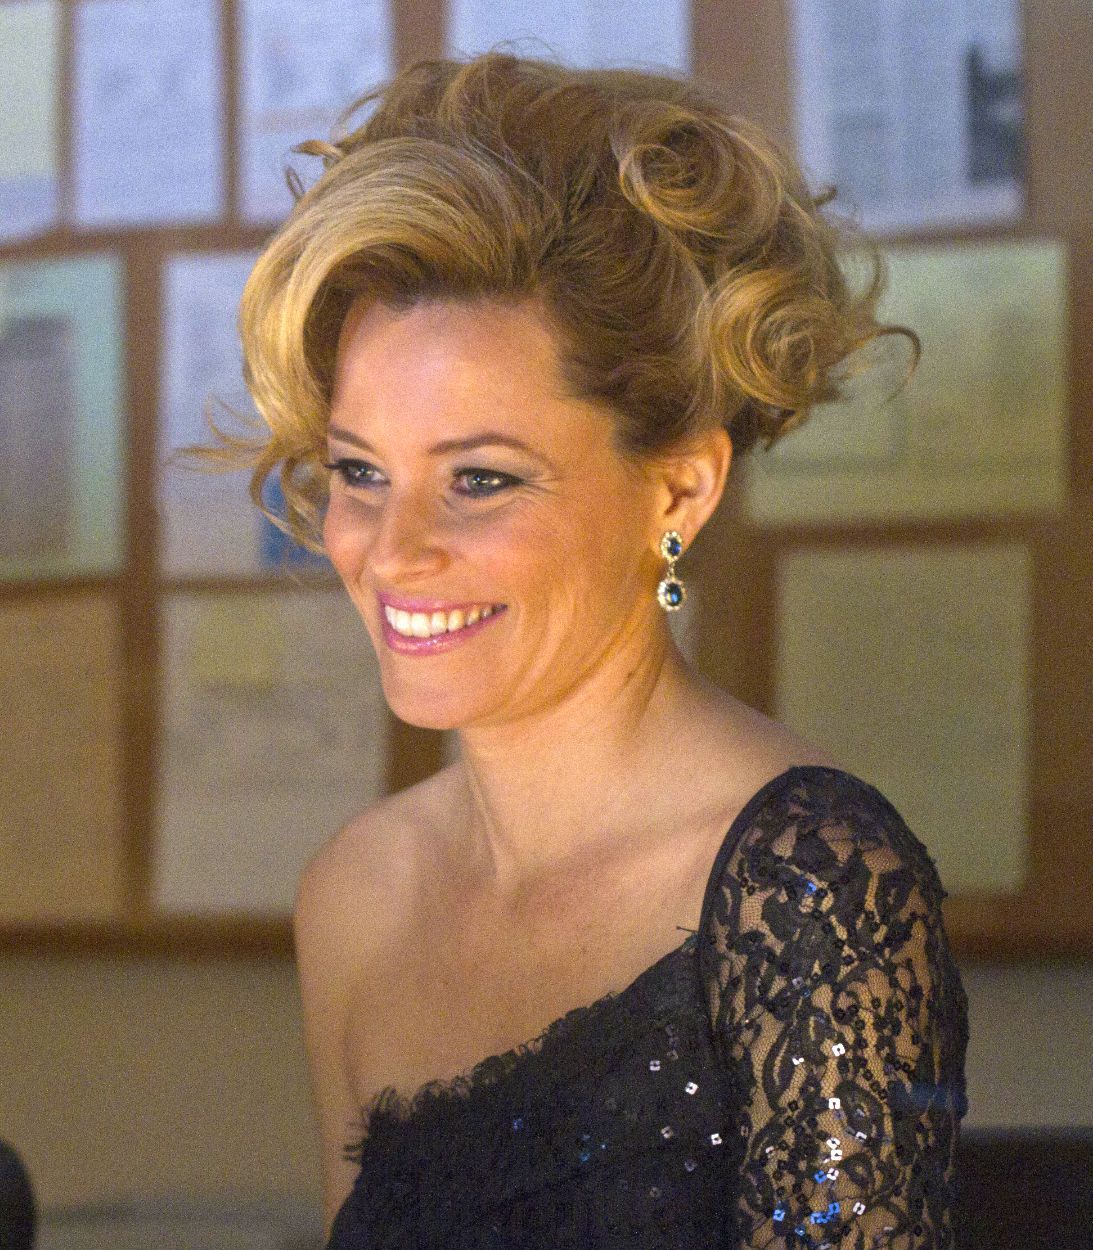 Elizabeth Banks appears in Pitch Perfect 2